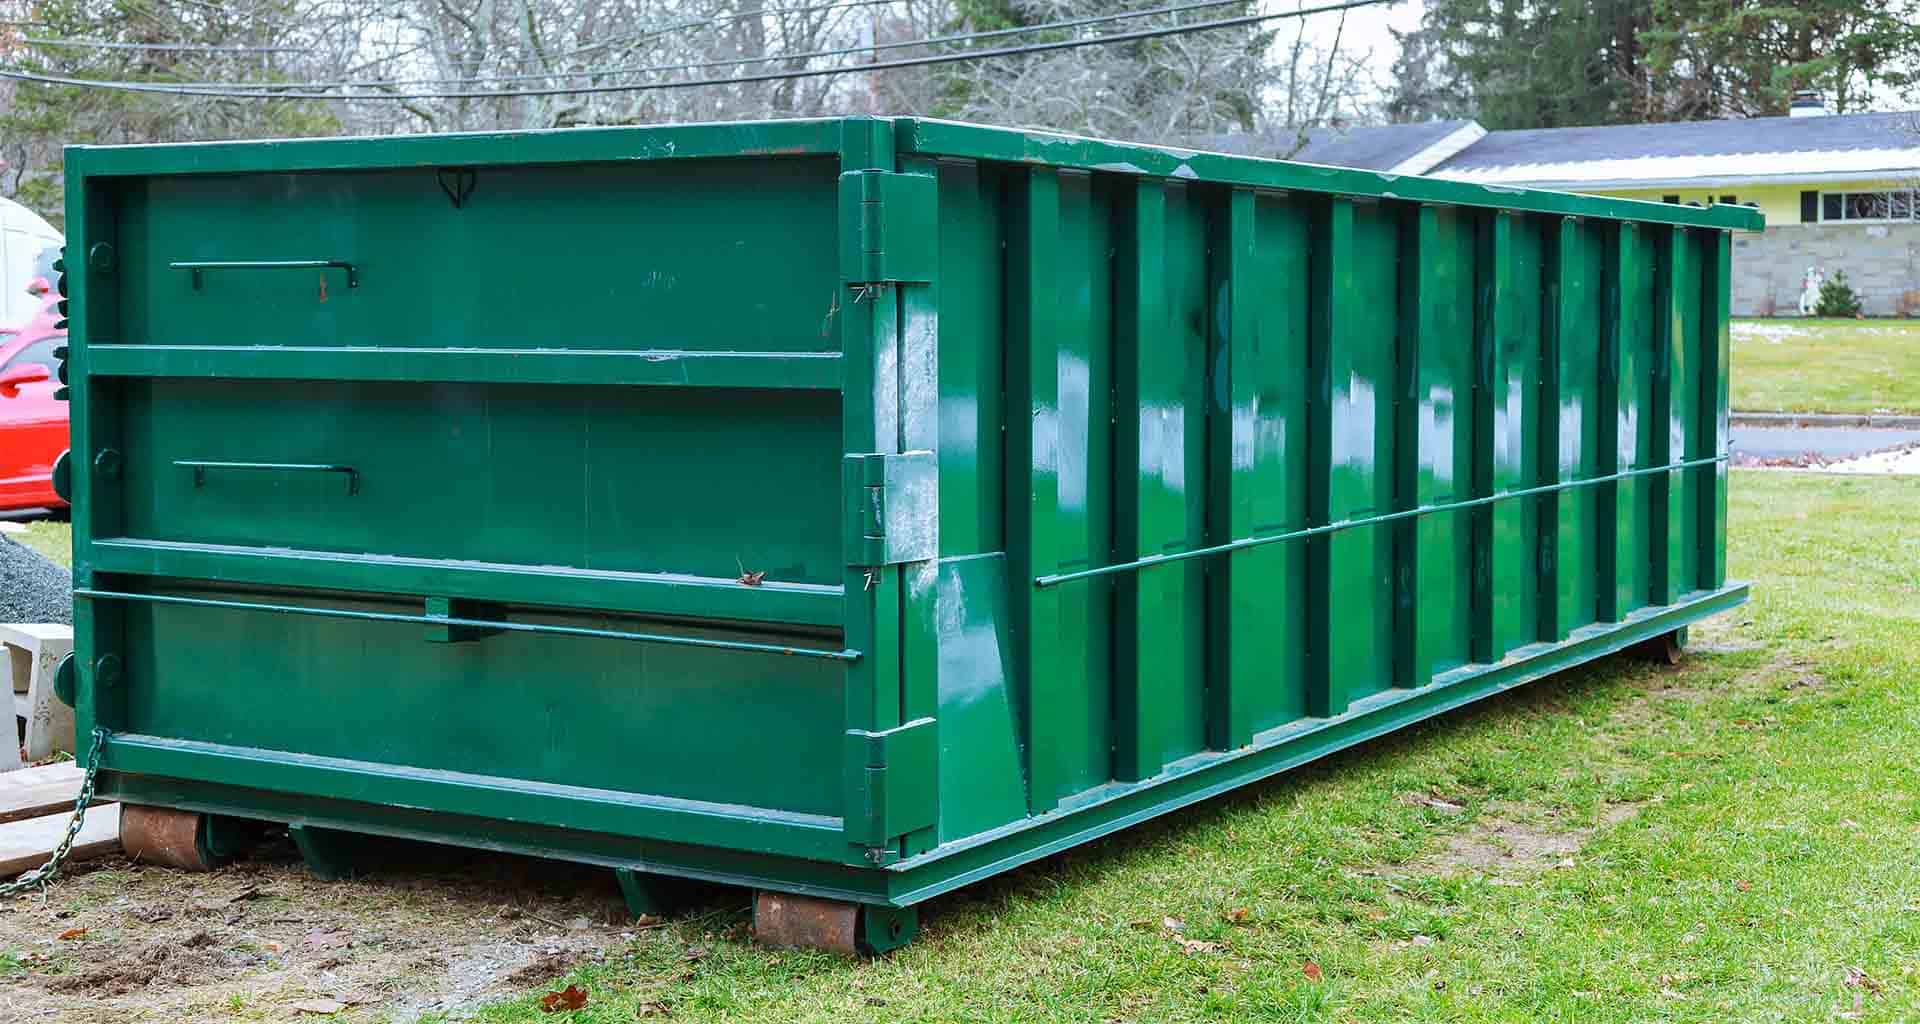 Dumpster Rentals in McMurray PA